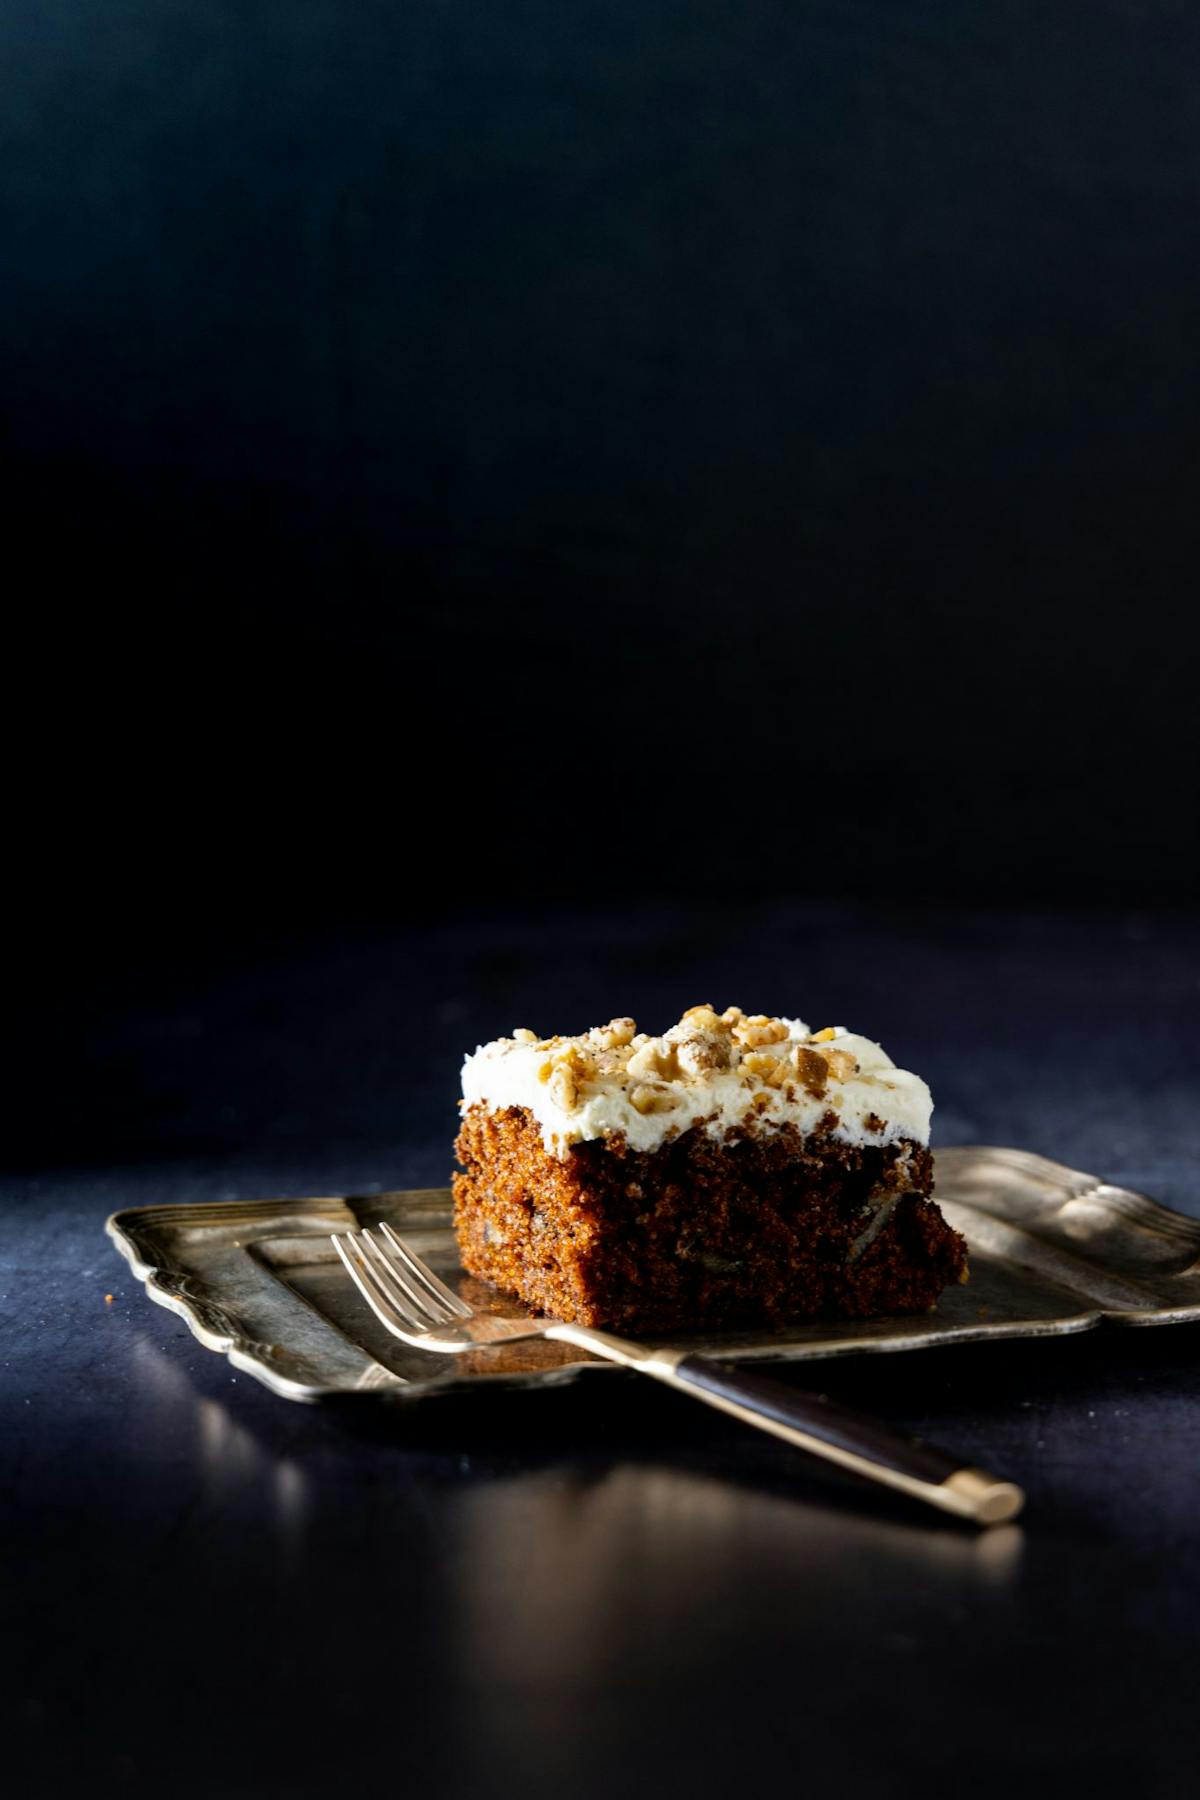 Best classic carrot cake recipes to bake at home